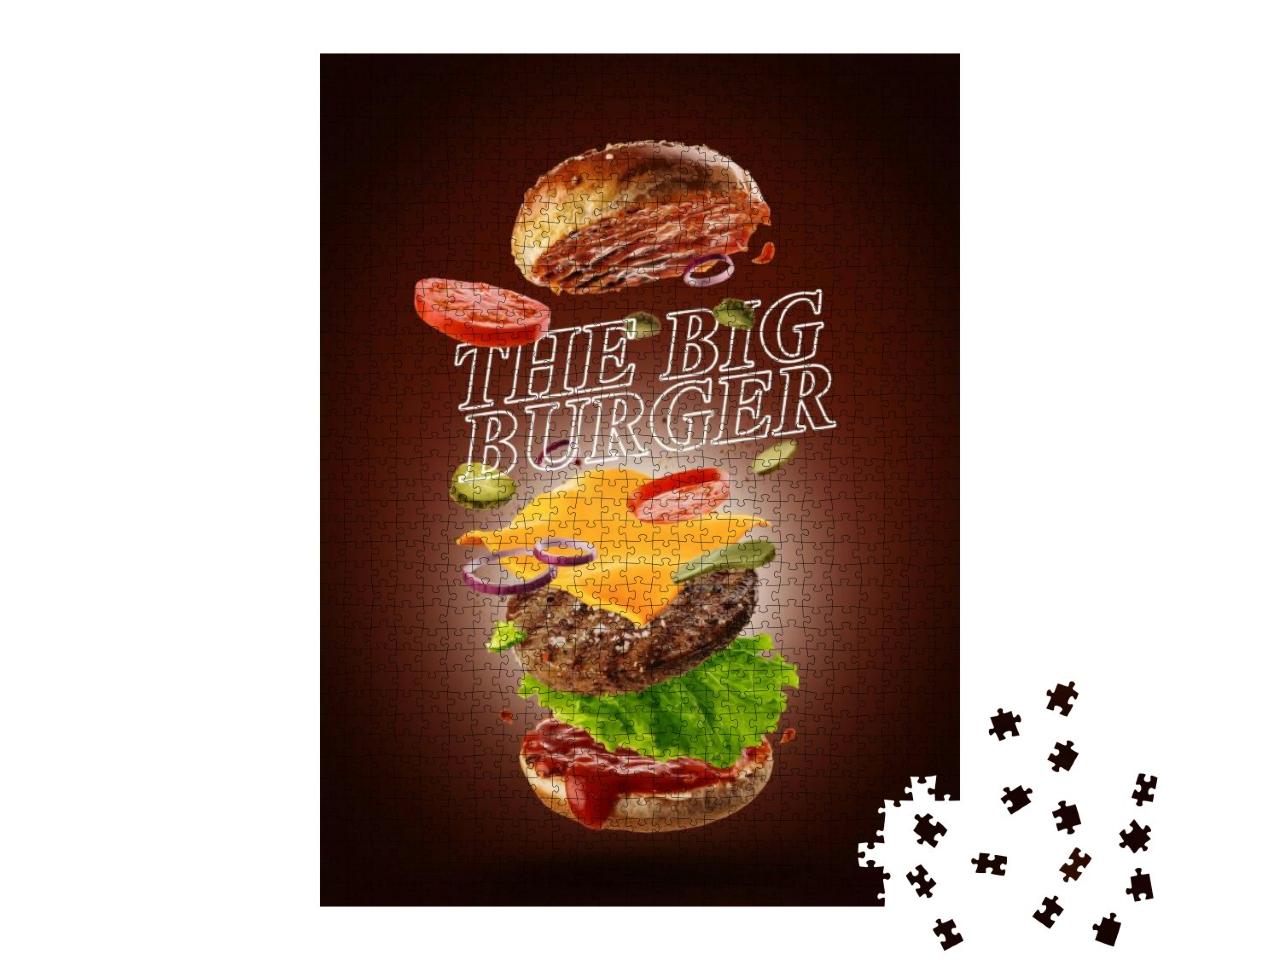 Jumping Burger Ads, Delicious & Attractive Hamburger with... Jigsaw Puzzle with 1000 pieces